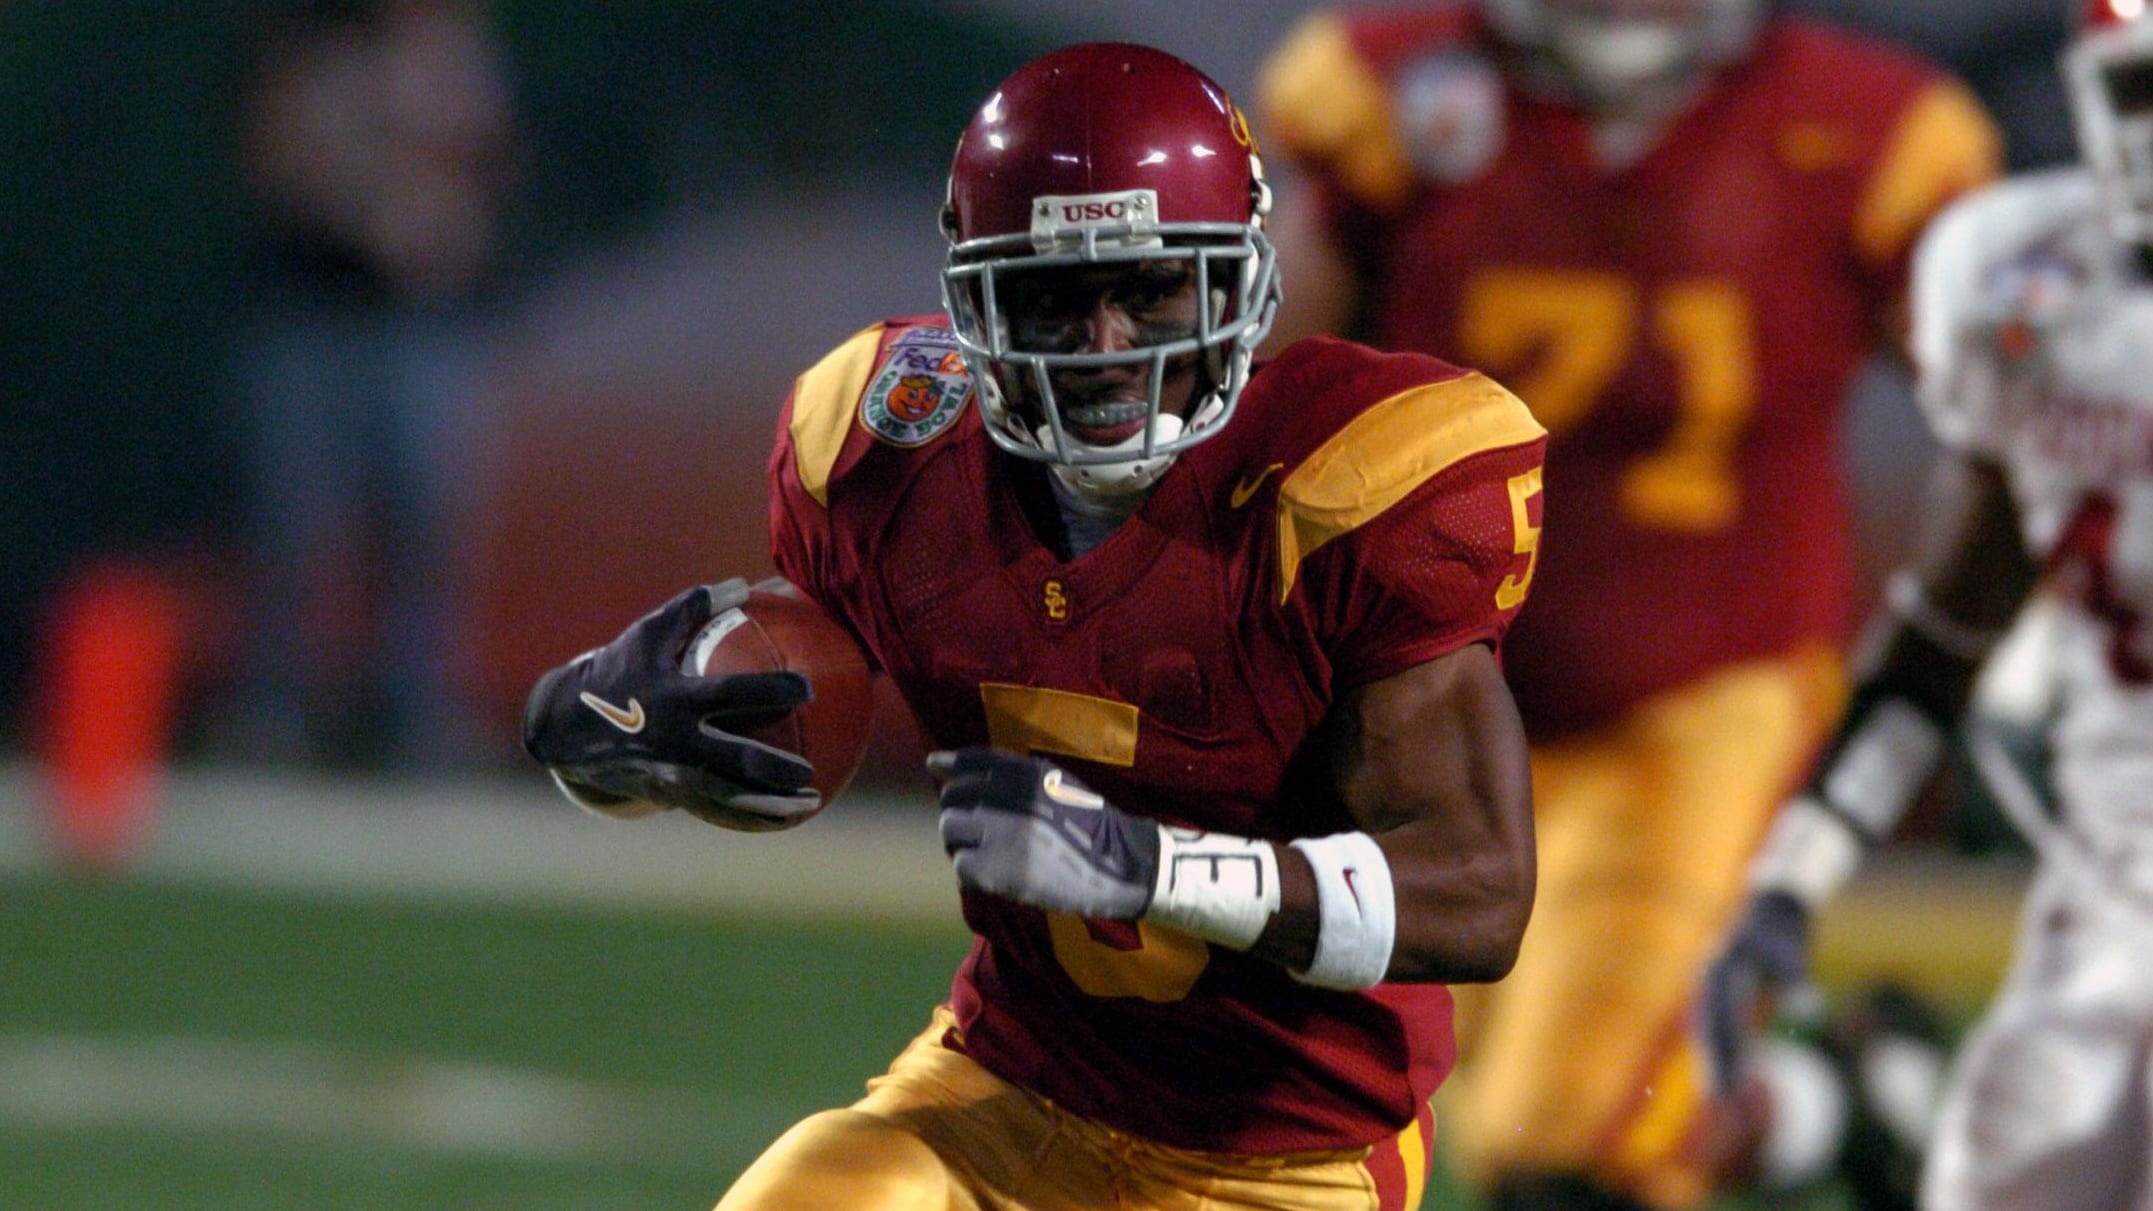 Reggie Bush has his Heisman Trophy back, but the former USC football great is still suing the NCAA.